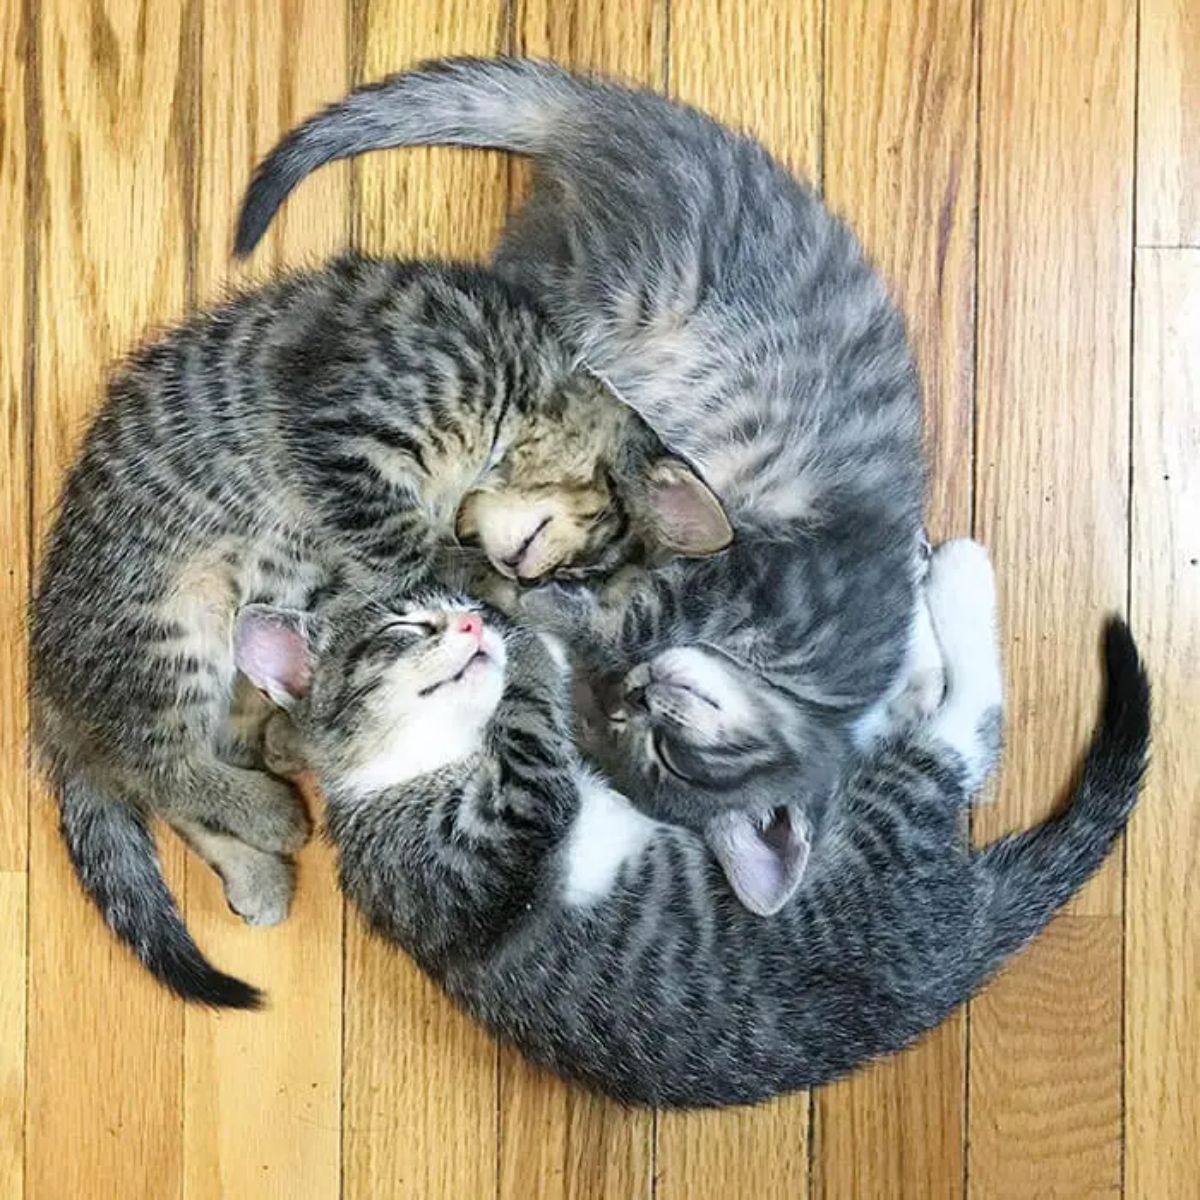 2 grey and white tabby kittens sleeping on wooden floor in a circle